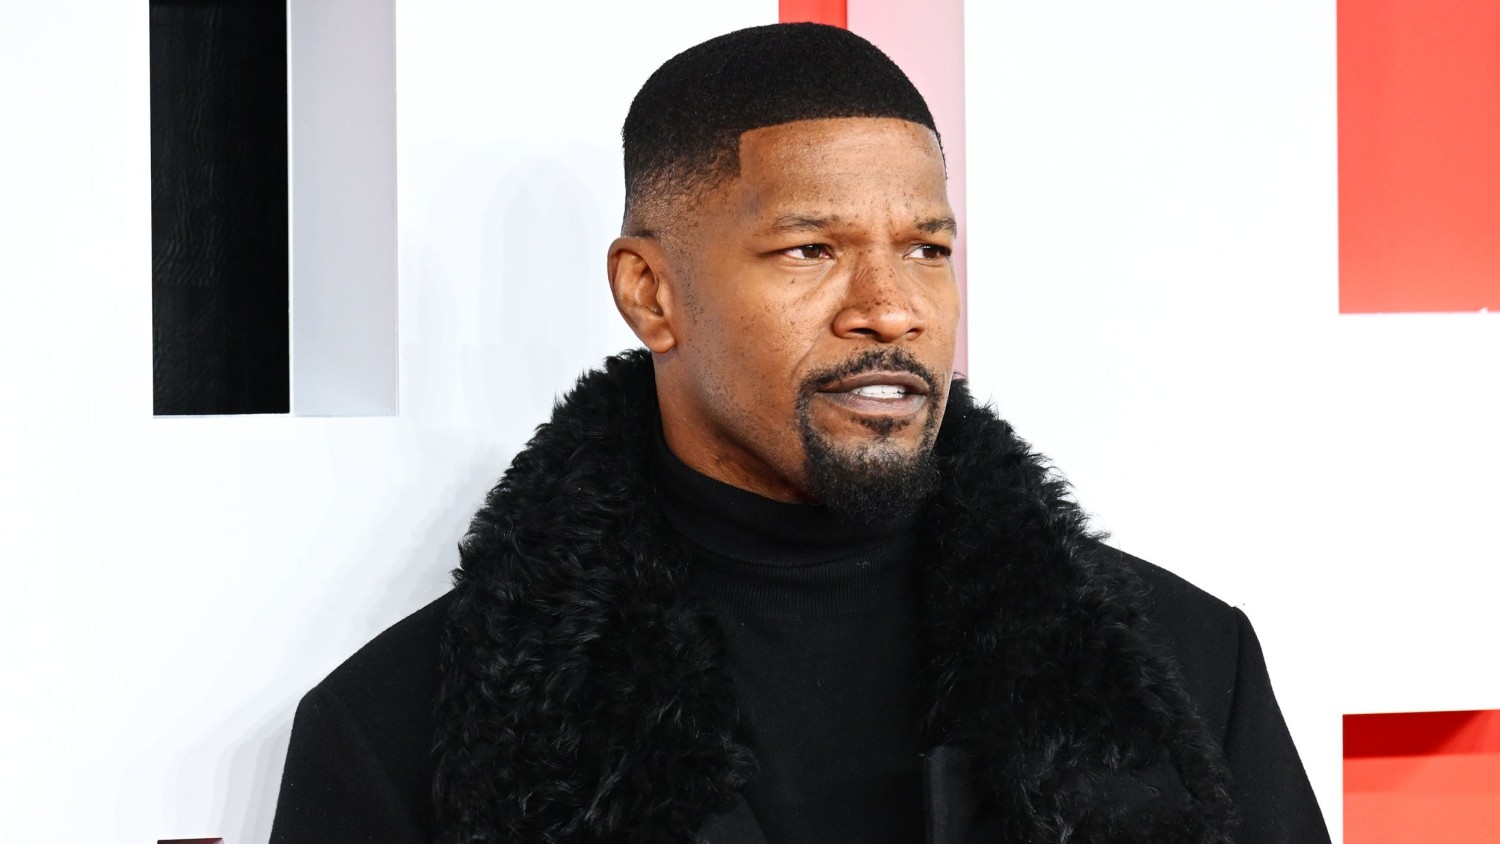 Jamie Foxx, seen here at the "Creed III" European Premiere on February 15, 2023 in London, England, is tight-lipped about his private life. Joe Maher/Getty Images